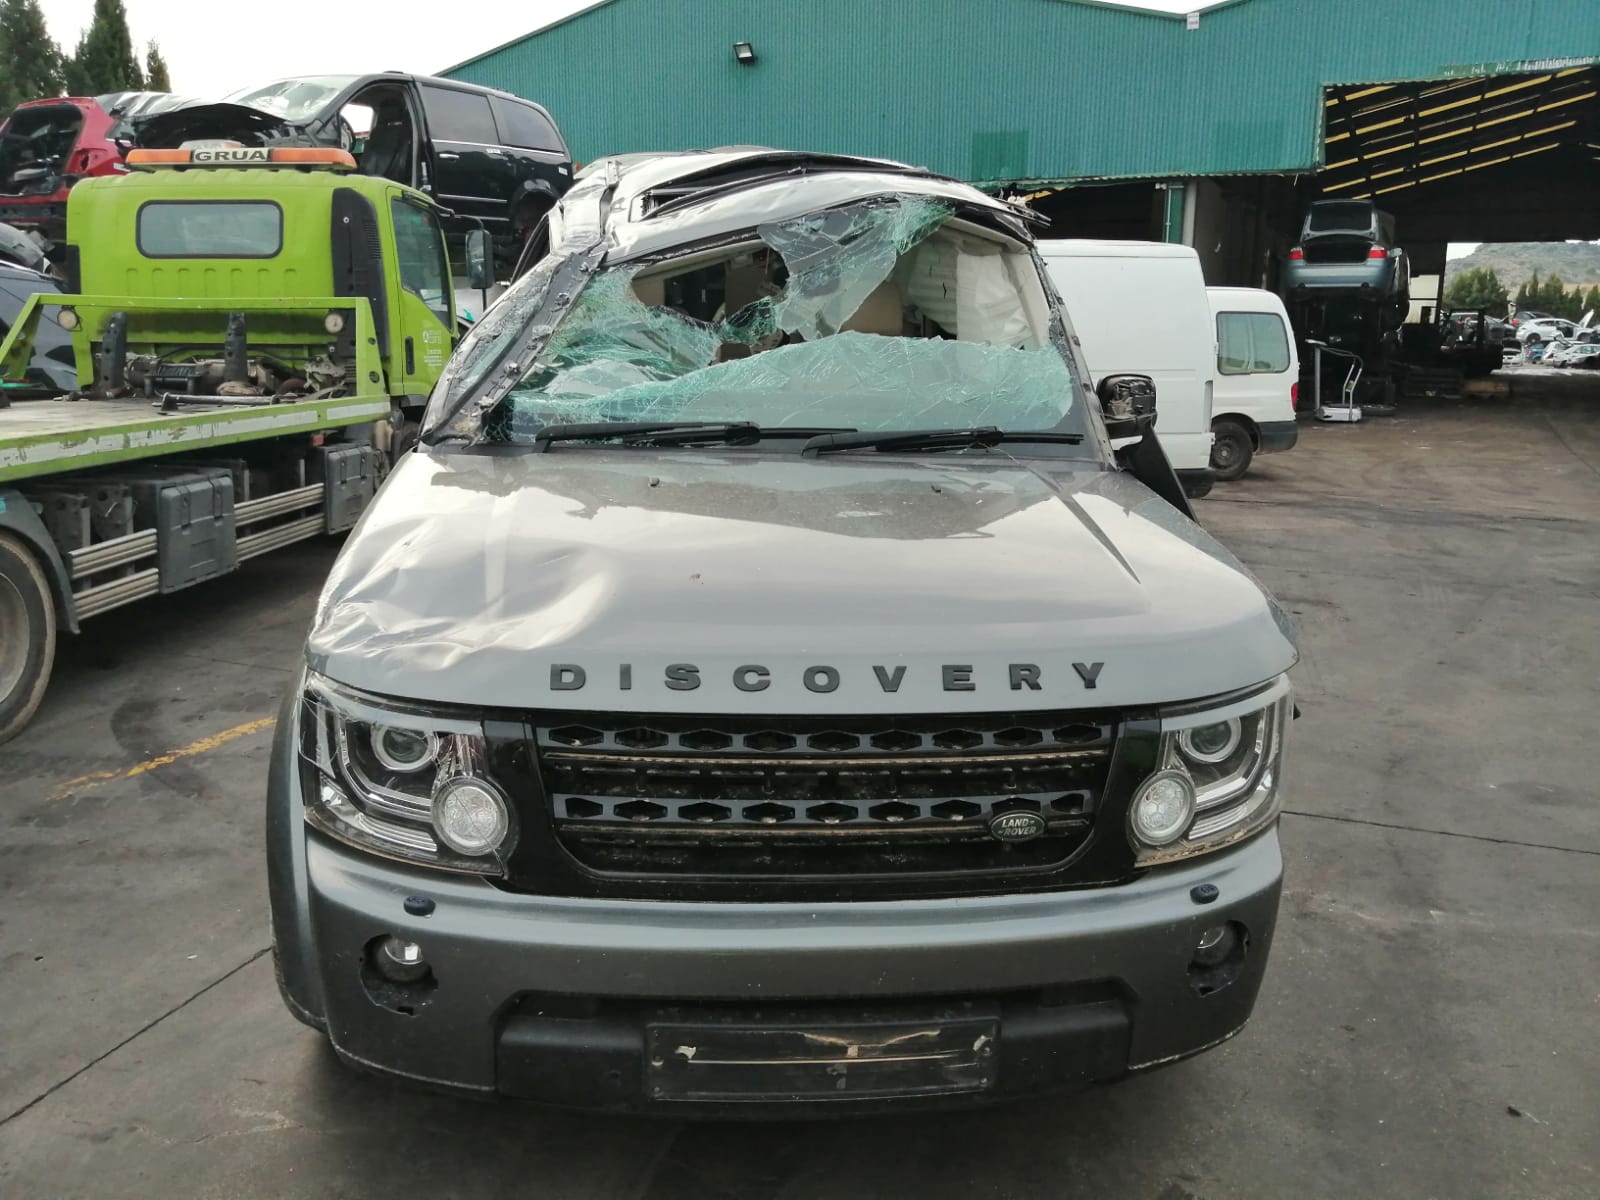 LAND ROVER Discovery 4 generation (2009-2016) Other Engine Compartment Parts F8741005 18520809